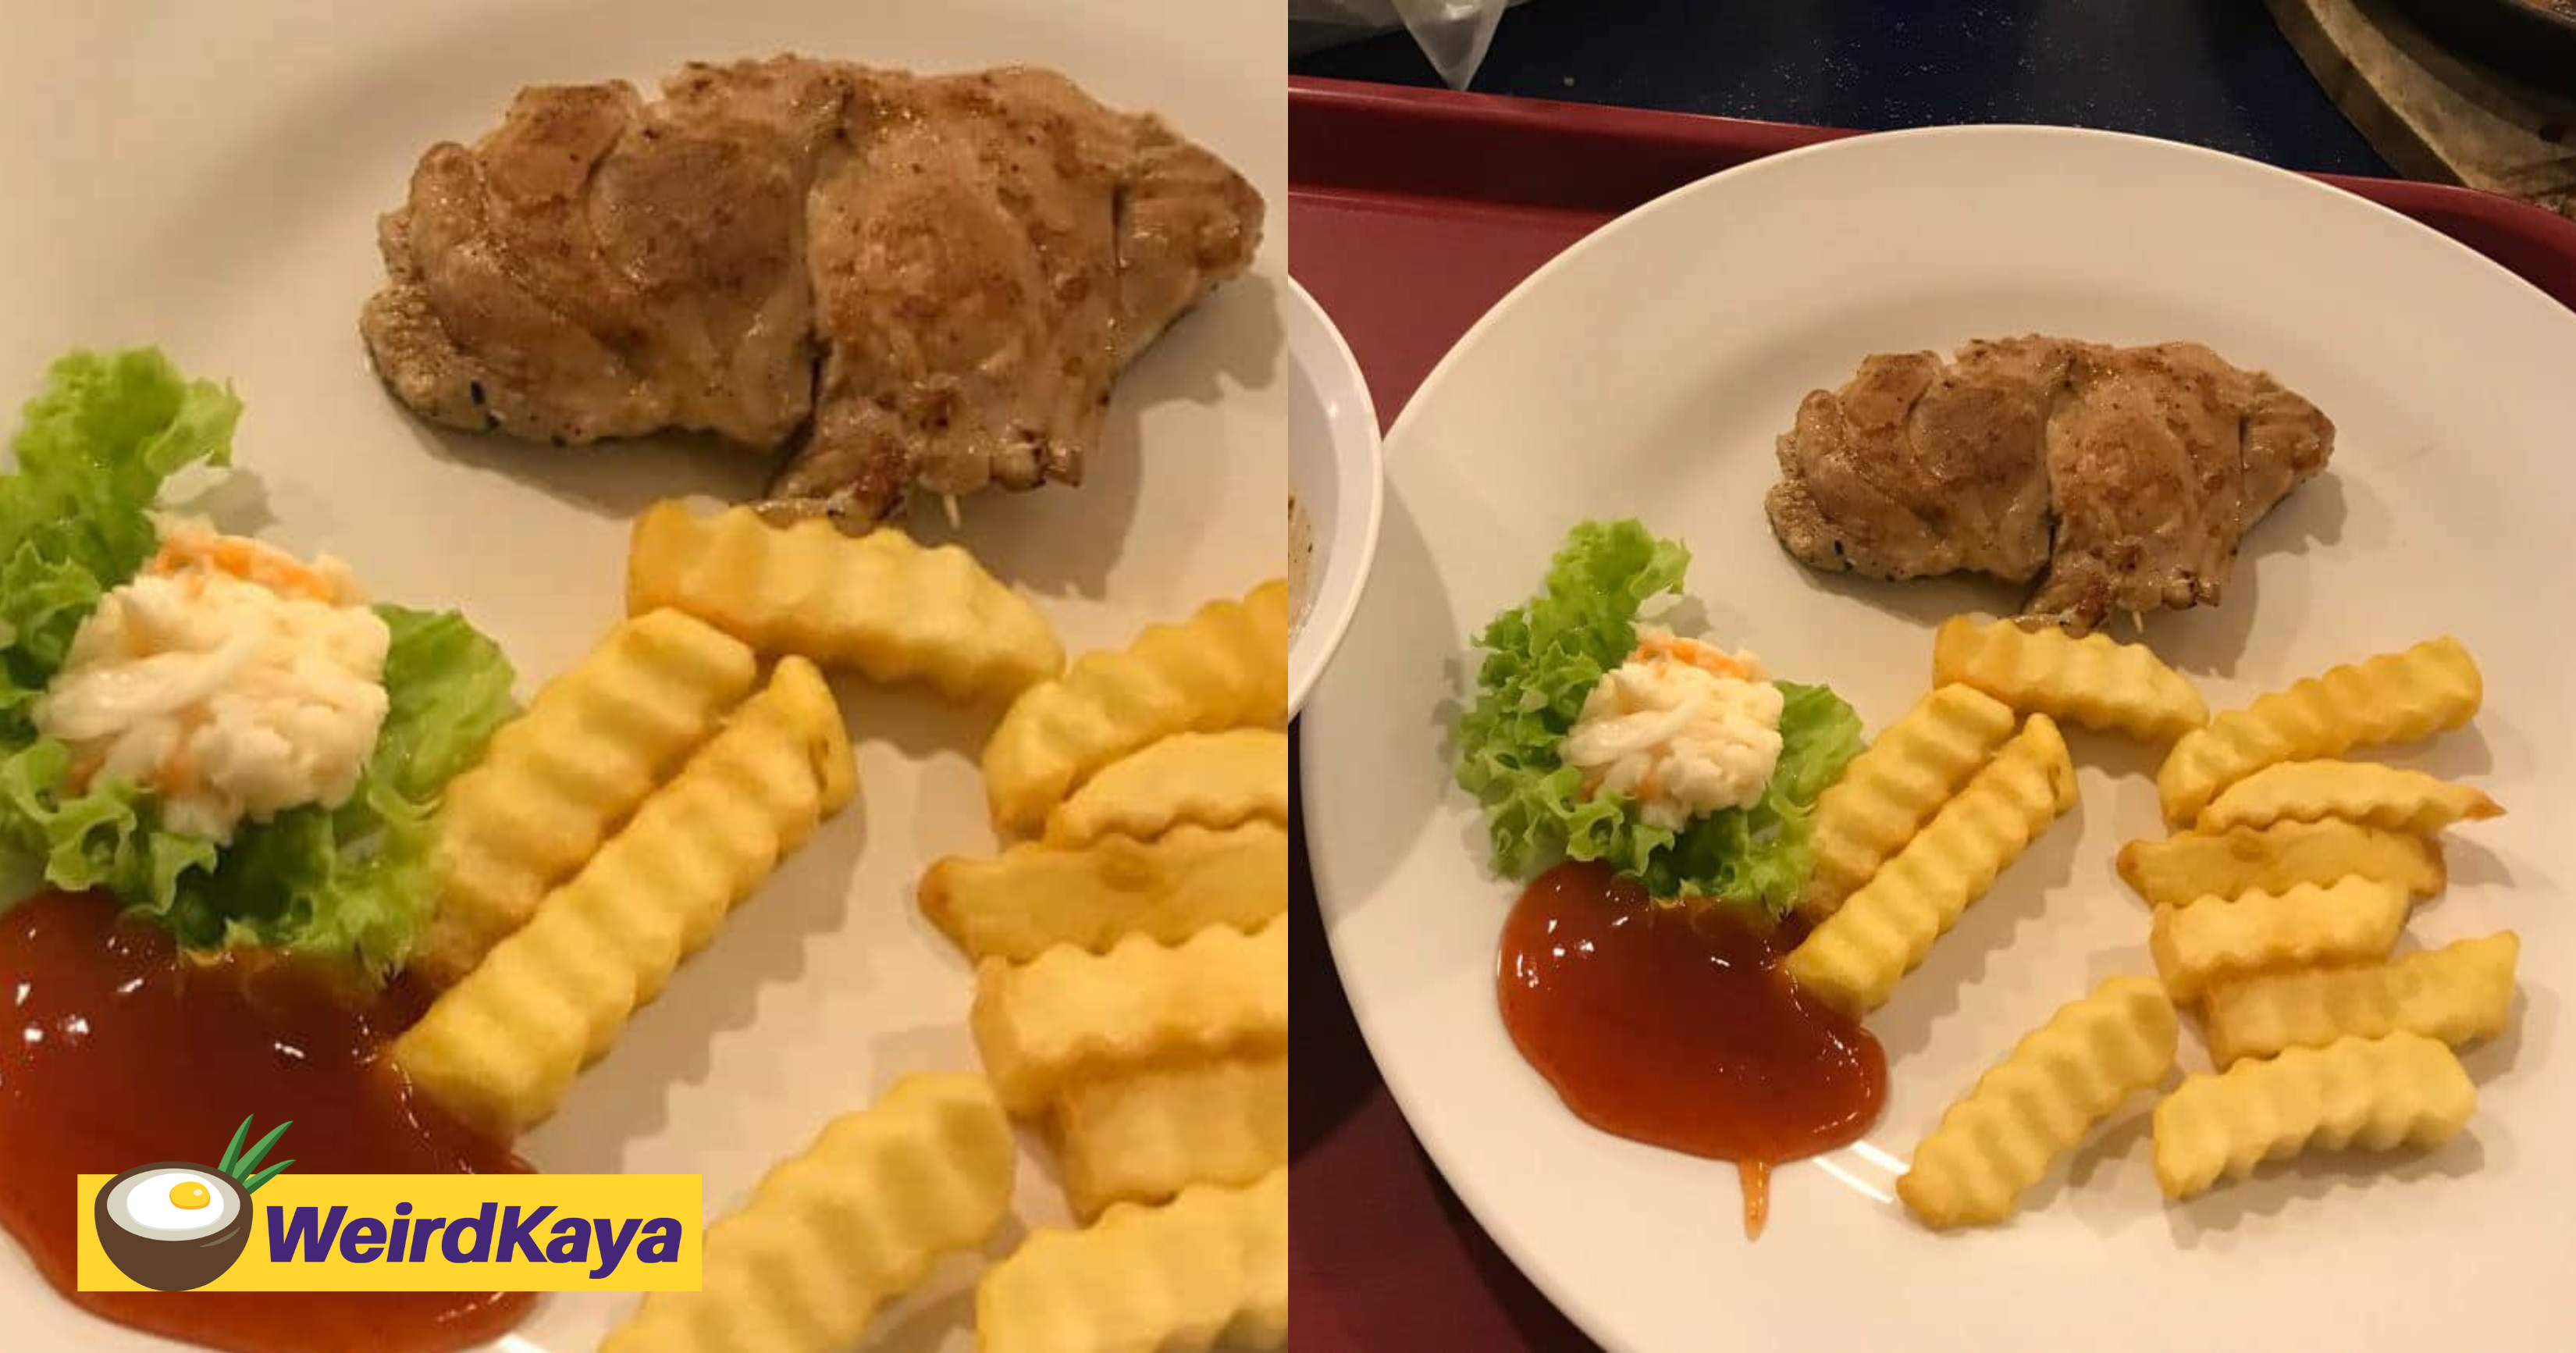 M'sian shocked by size of rm13 chicken chop which was smaller than his hand | weirdkaya